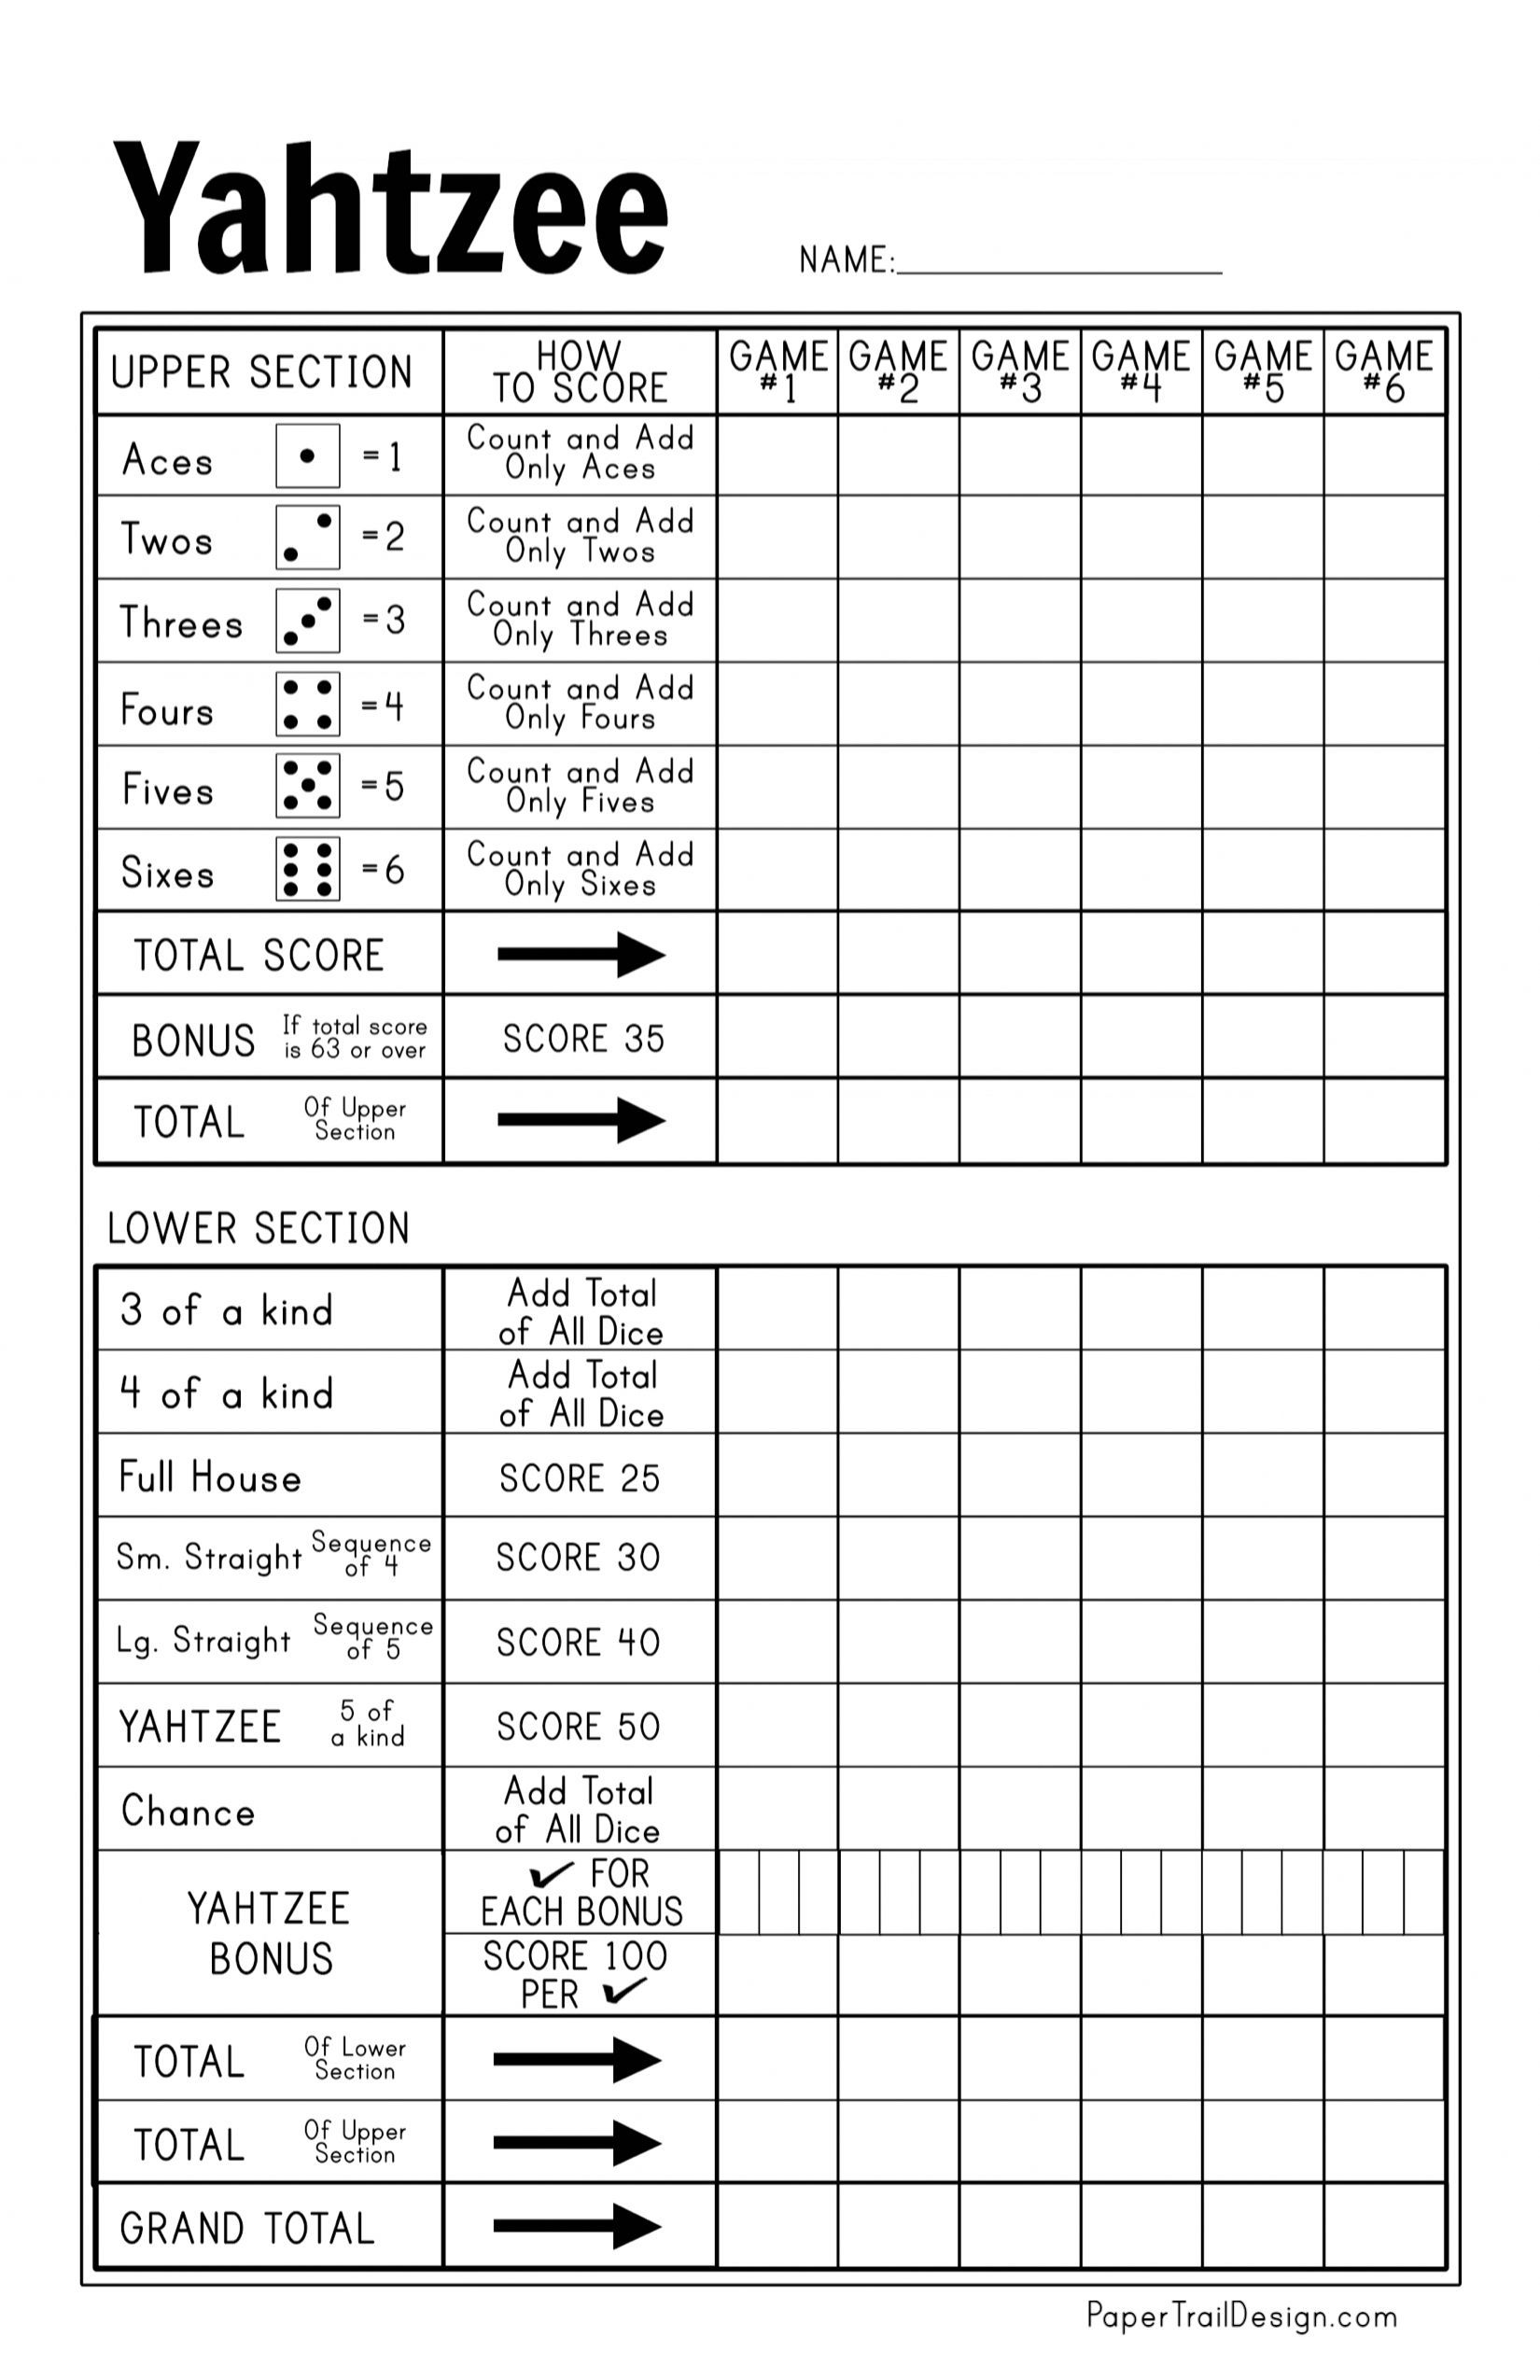 Use This Downloadable Printable Yahtzee Score Card And Never Run Out Of 